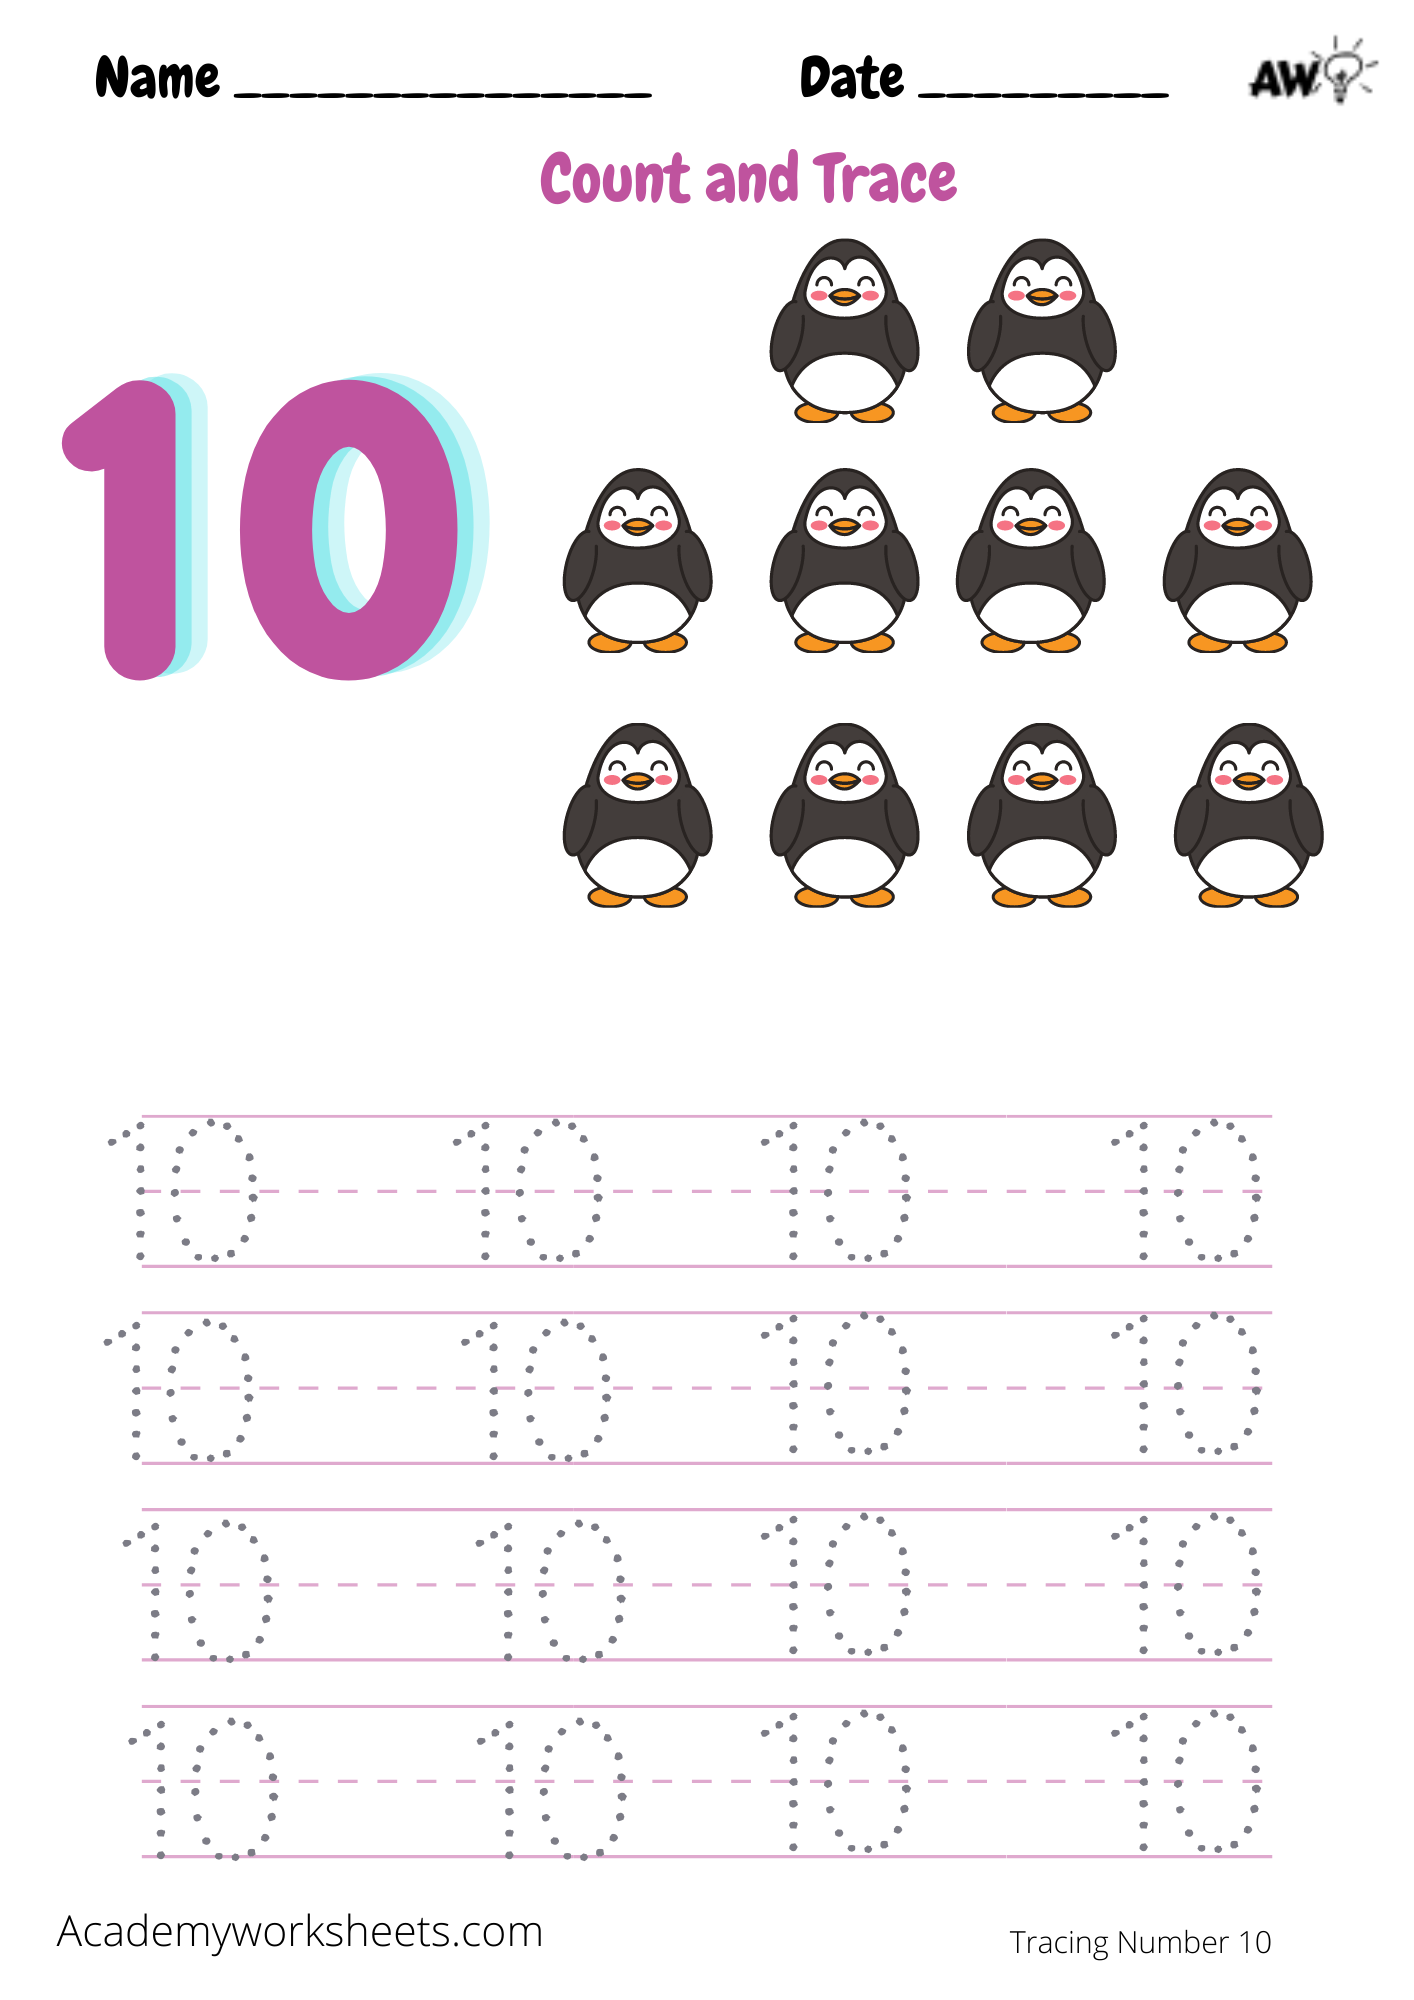 The Number 10 - Tracing tracing numbers 10 - Academy Worksheets